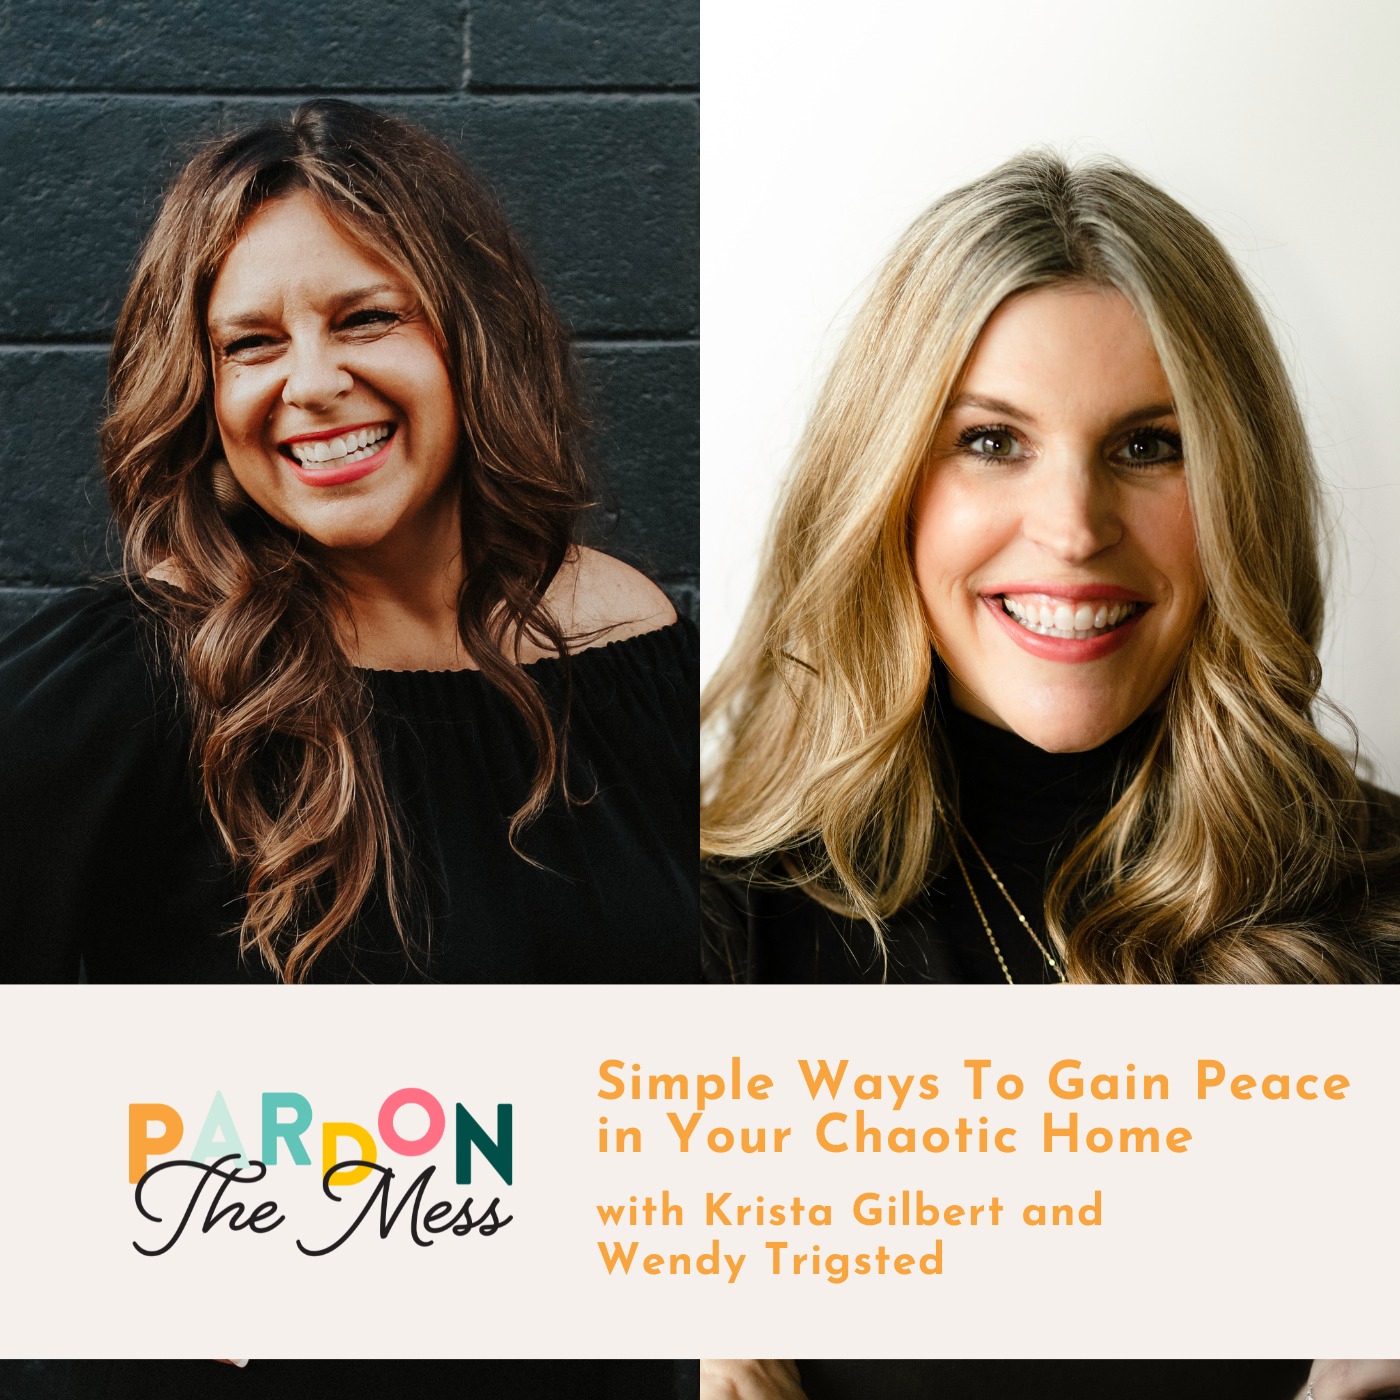 Simple Ways To Gain Peace in Your Chaotic Home with Krista Gilbert and Wendy Trigsted